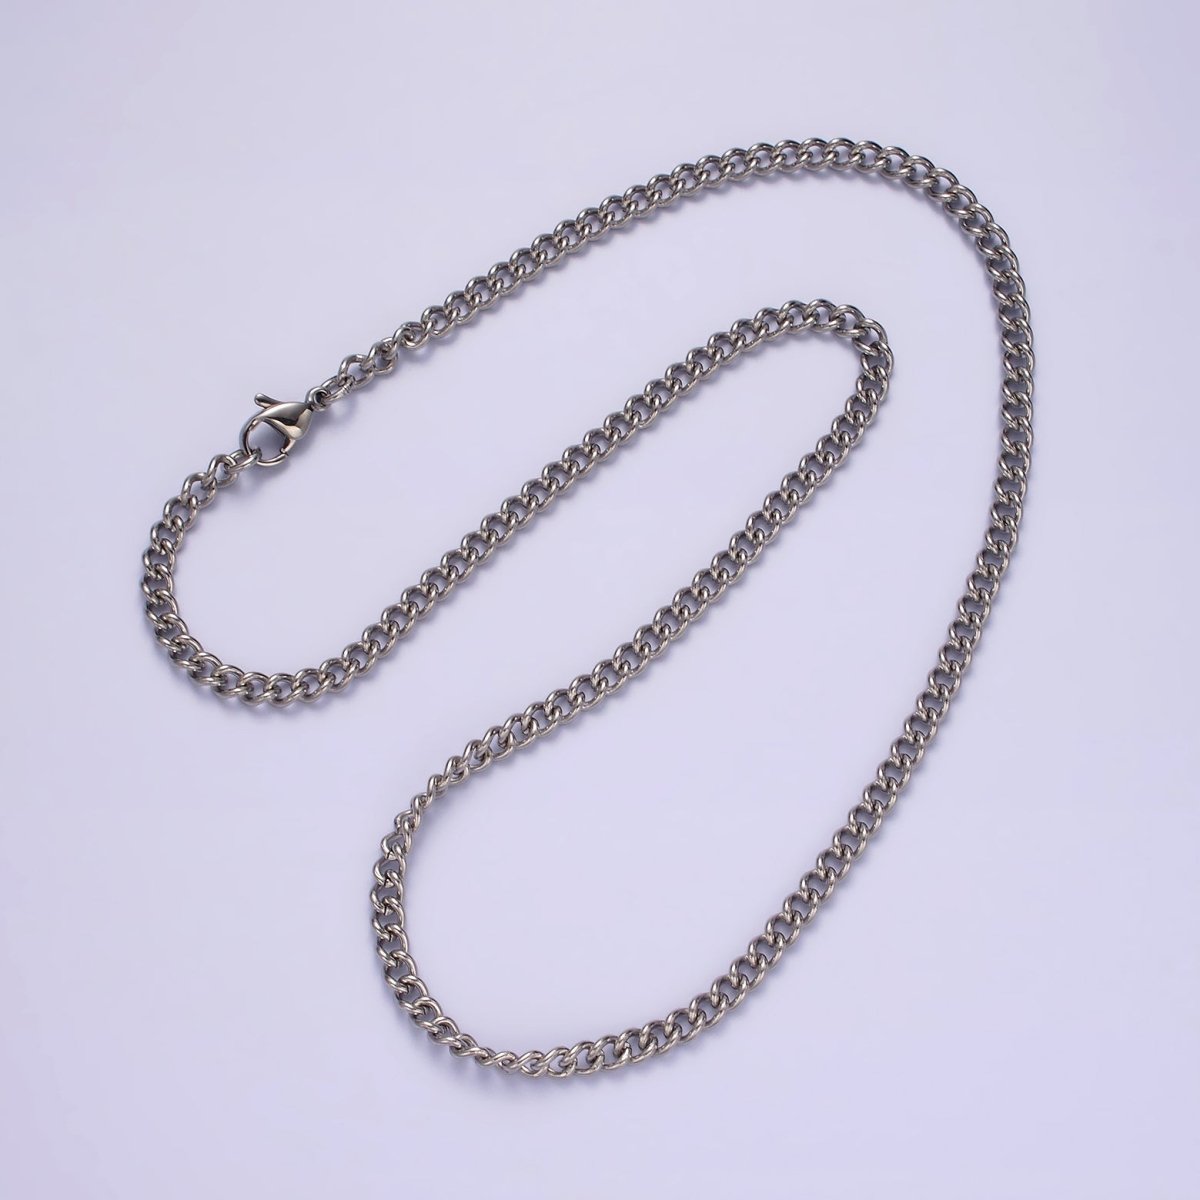 Stainless Steel Curb Chain Necklace 3.5mm Curb Chain Jewelry Making 18 inch Women Necklace | WA-2097 Clearance Pricing - DLUXCA